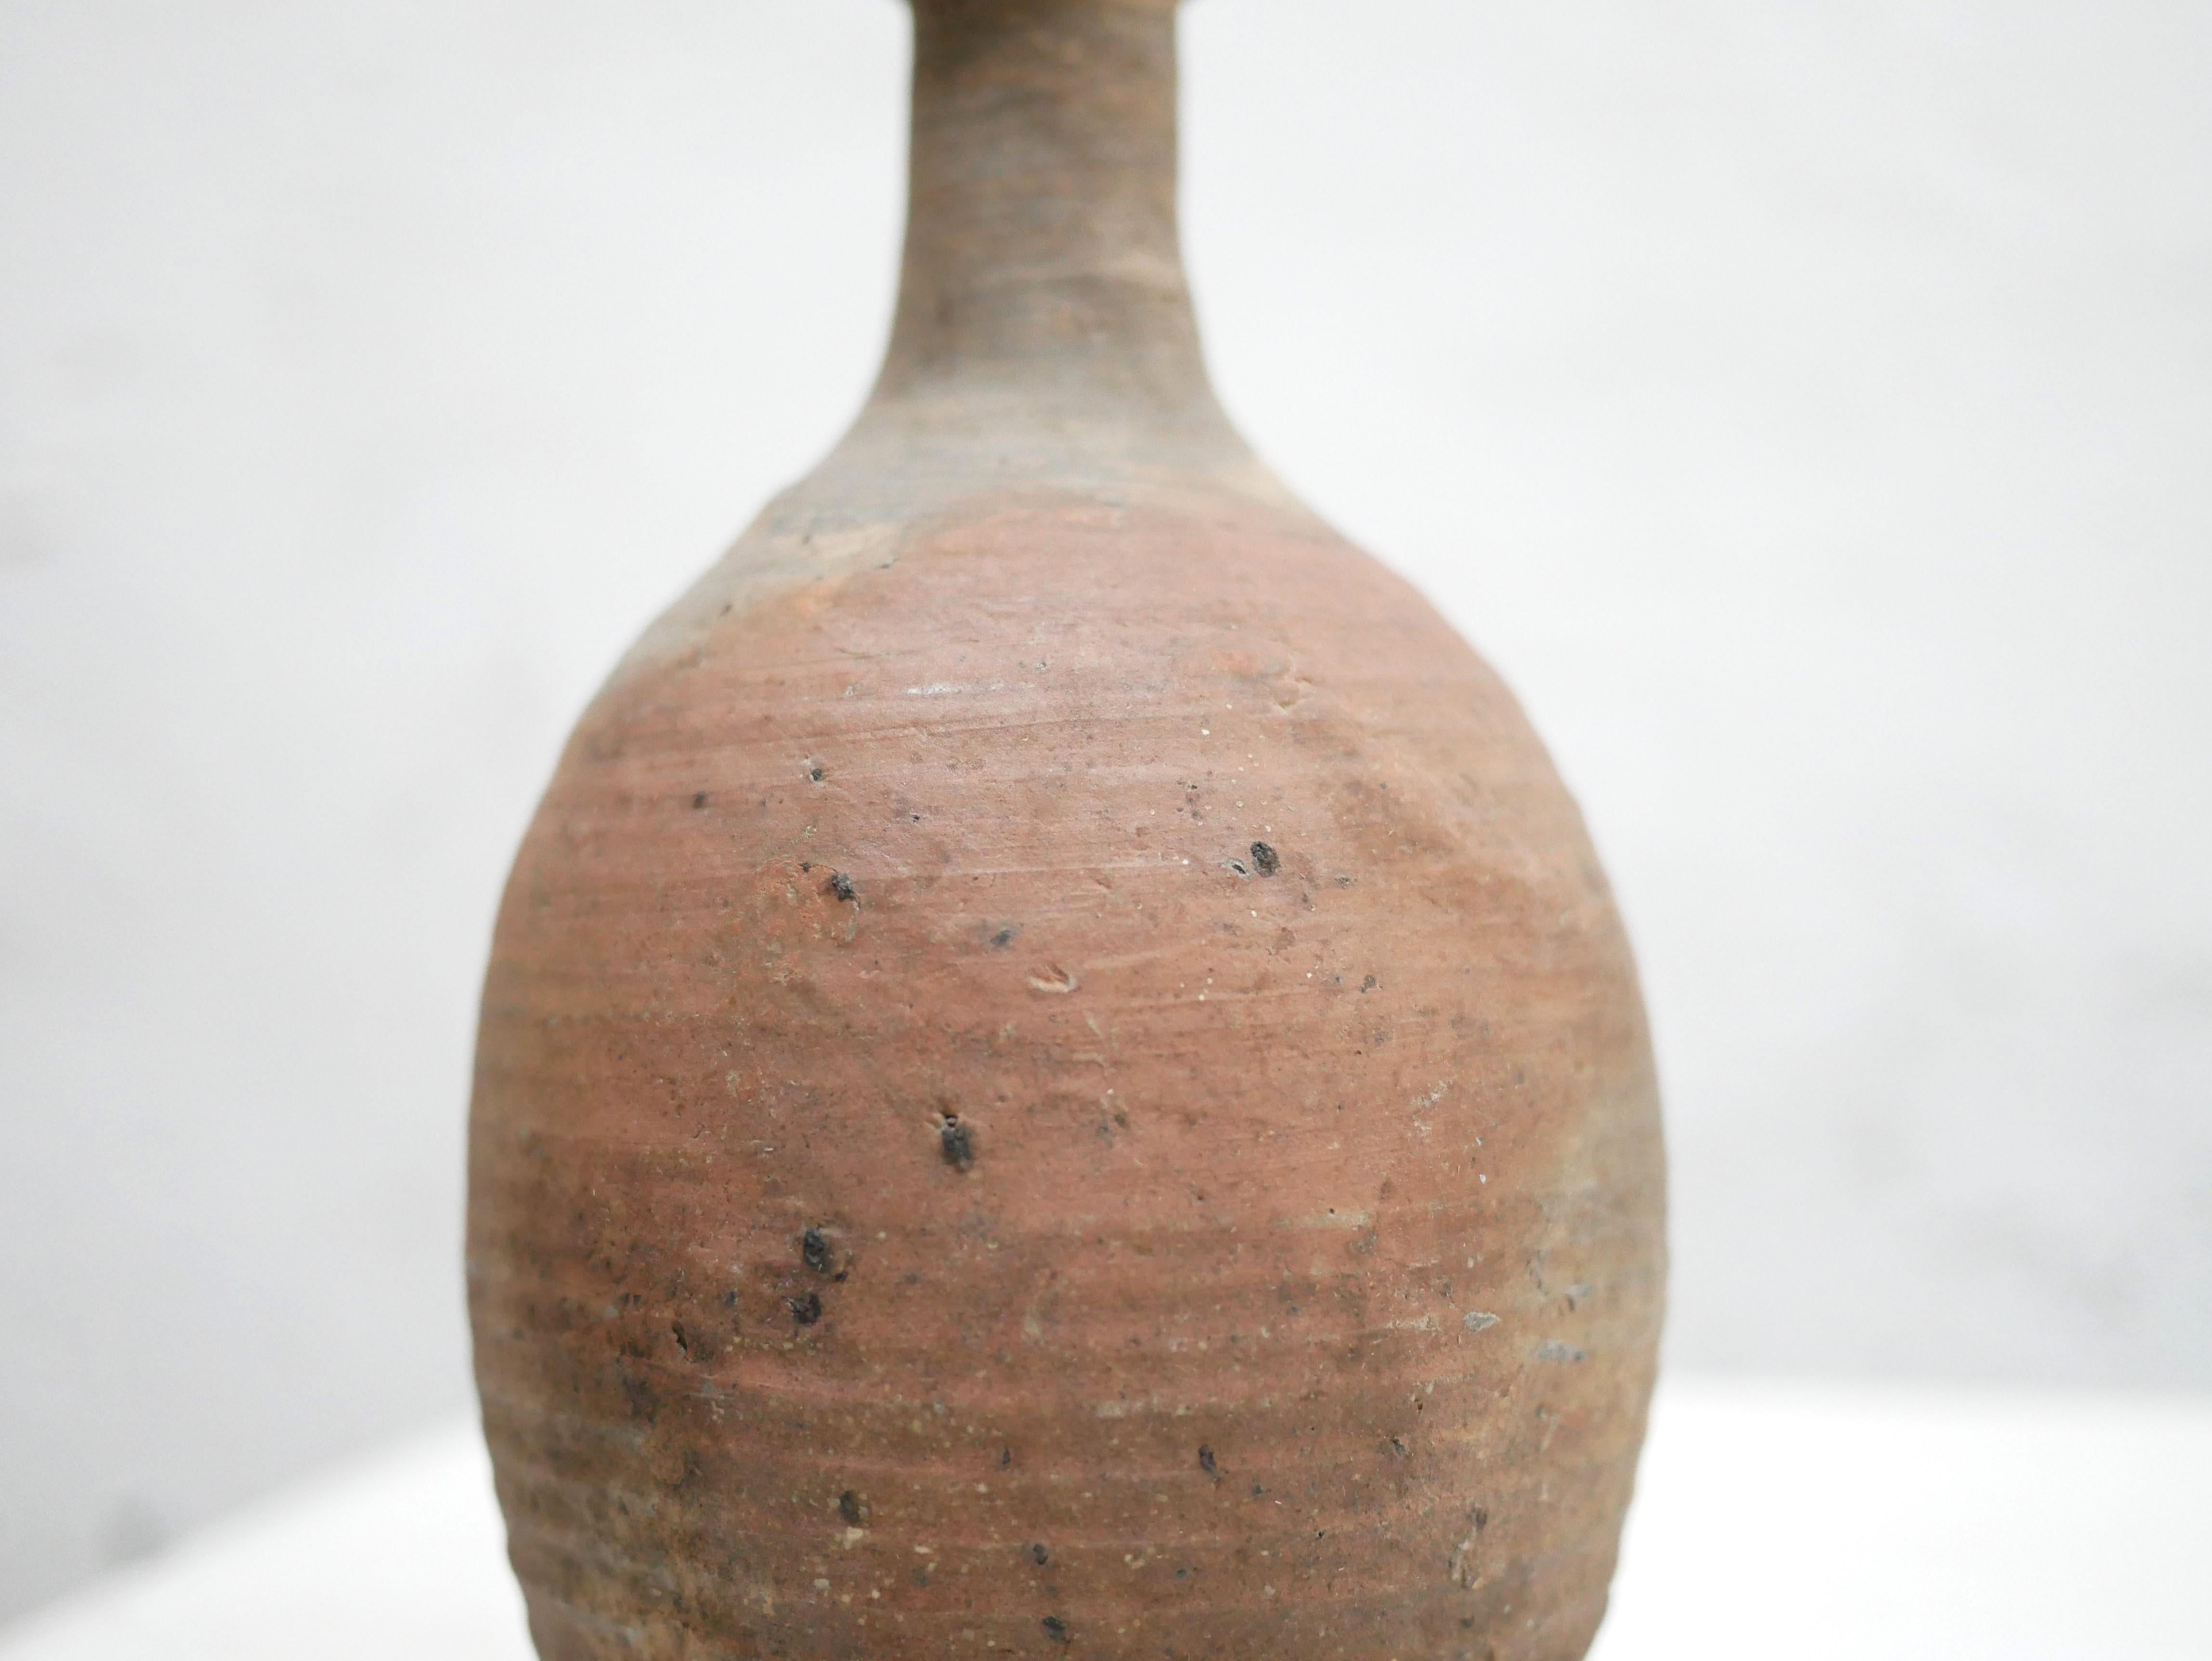 Terracotta jar dating from the 60s.

With its modern shape and mineral color, this ceramic will be perfect in a natural, refined and delicate decoration.
We simply imagine it placed on a shelf or a piece of furniture, decorated with a few dried